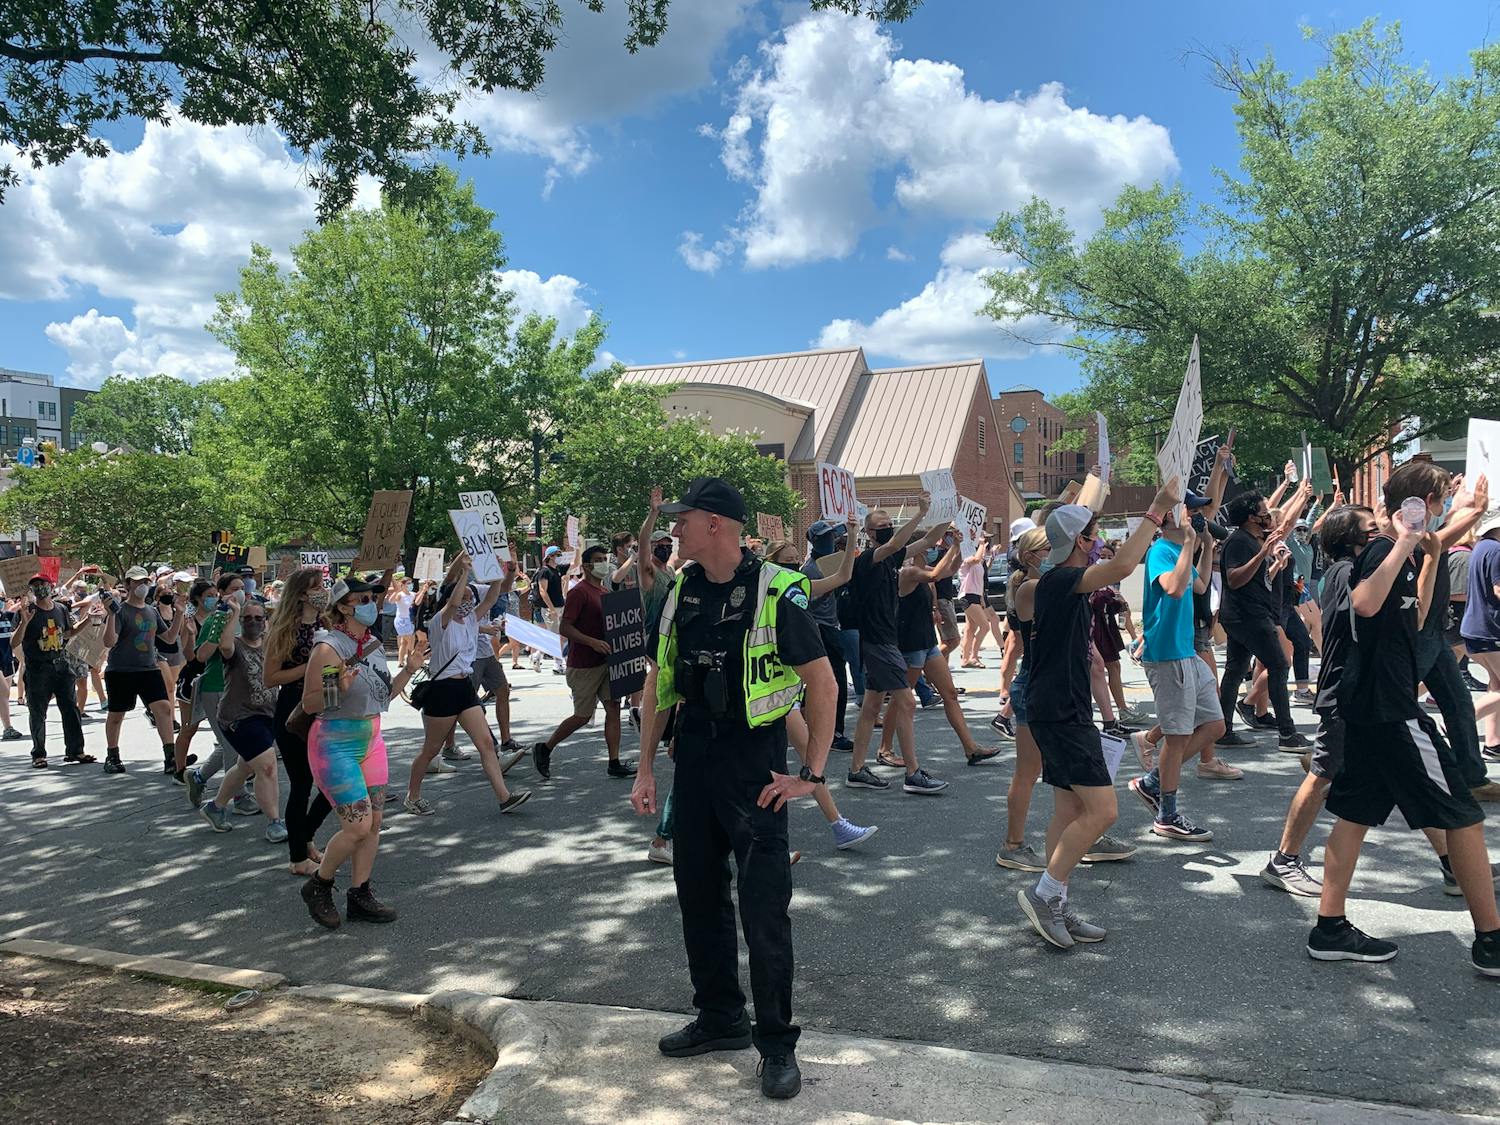 Protestors march past a Police Officer in Chapel Hill on Friday, June 12, 2020 during a protest against police brutality.